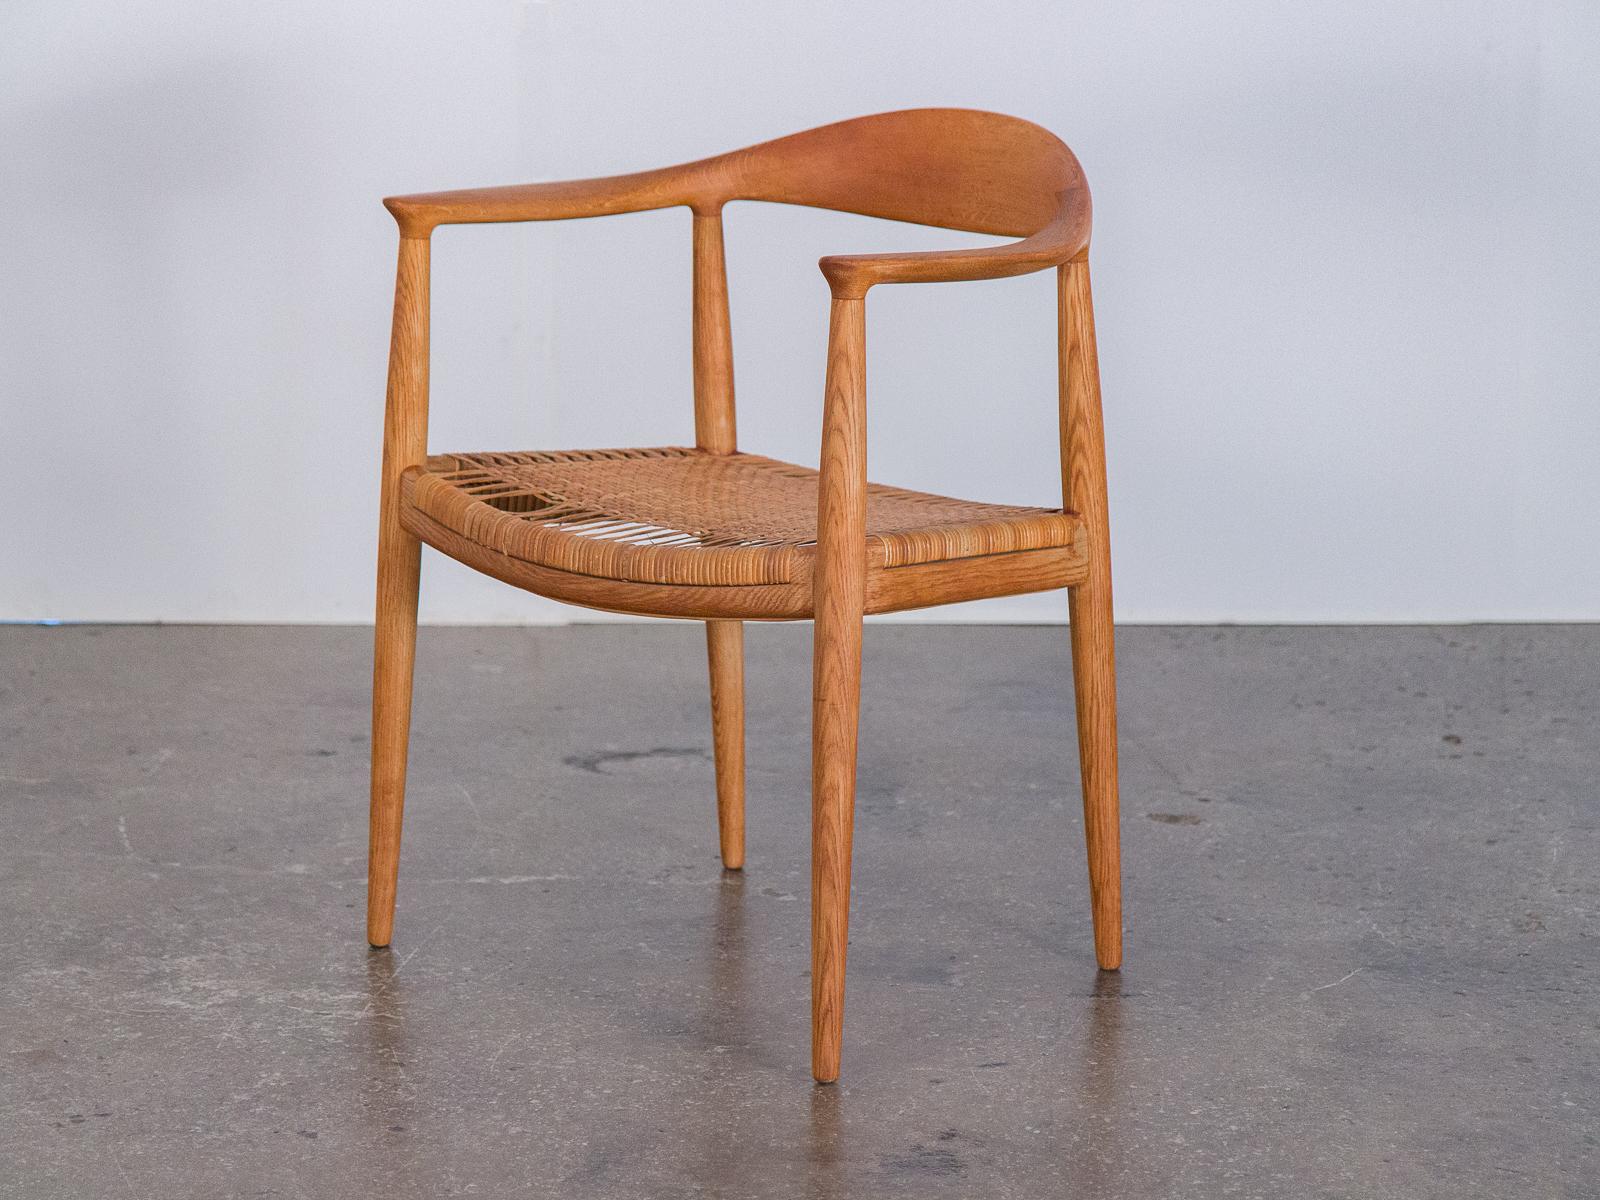 Four matching Model JH 501 dining chairs with cane seats, designed by Hans Wegner for Johannes Hansen, Denmark. This iconic design is best known as 